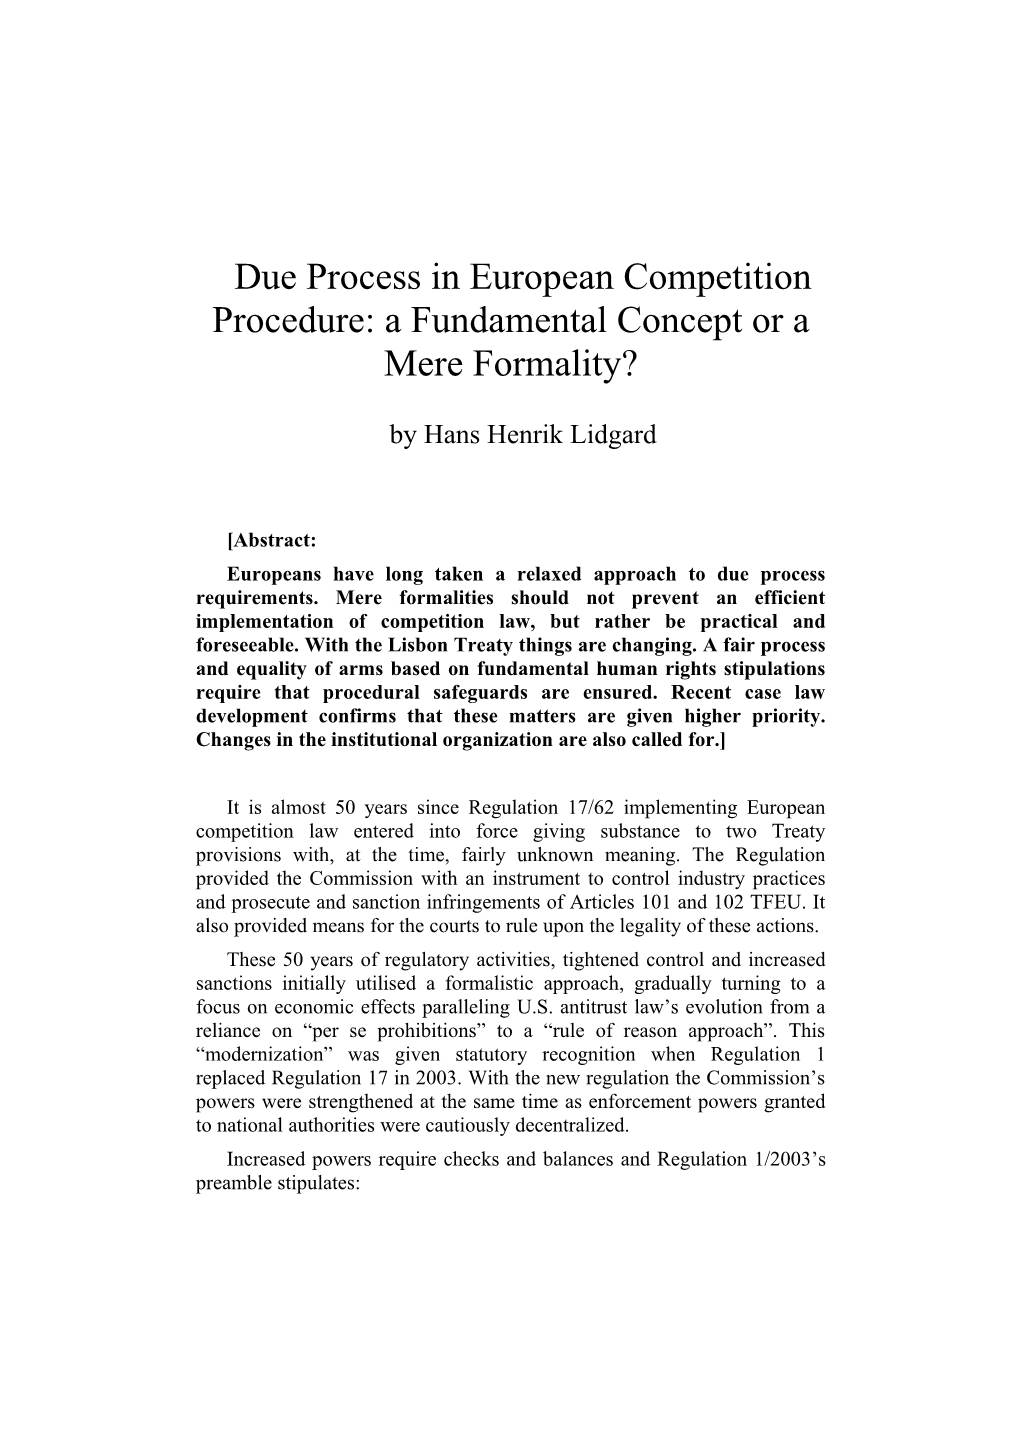 Due Process in European Competition Procedure: a Fundamental Concept Or a Mere Formality?